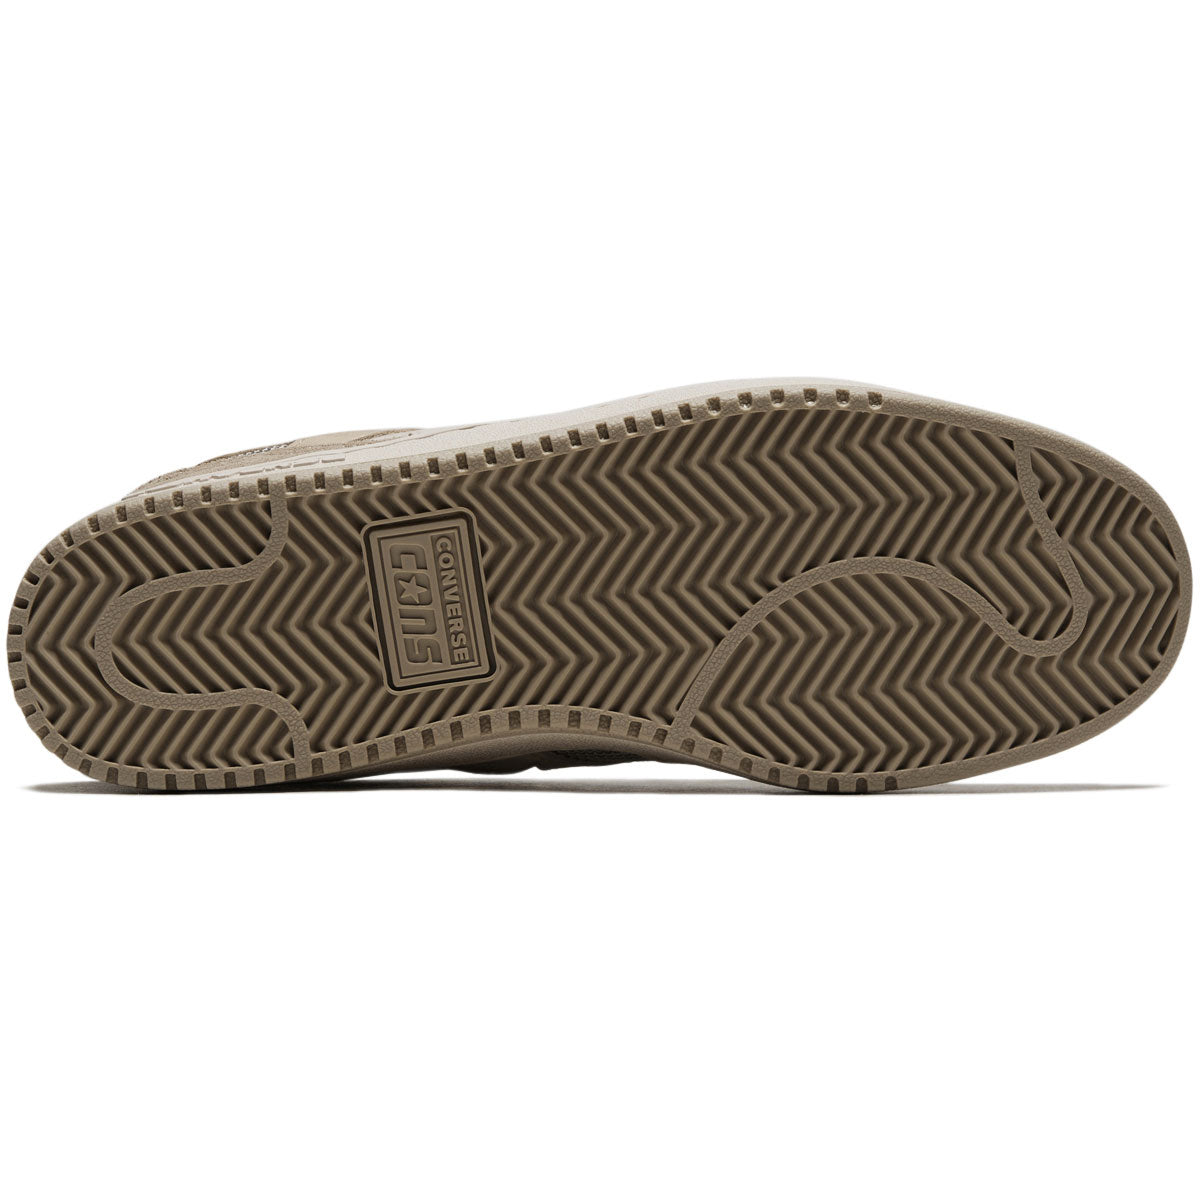 Converse AS-1 Pro Ox Shoes - Shifting Sand/Warm Sand image 4